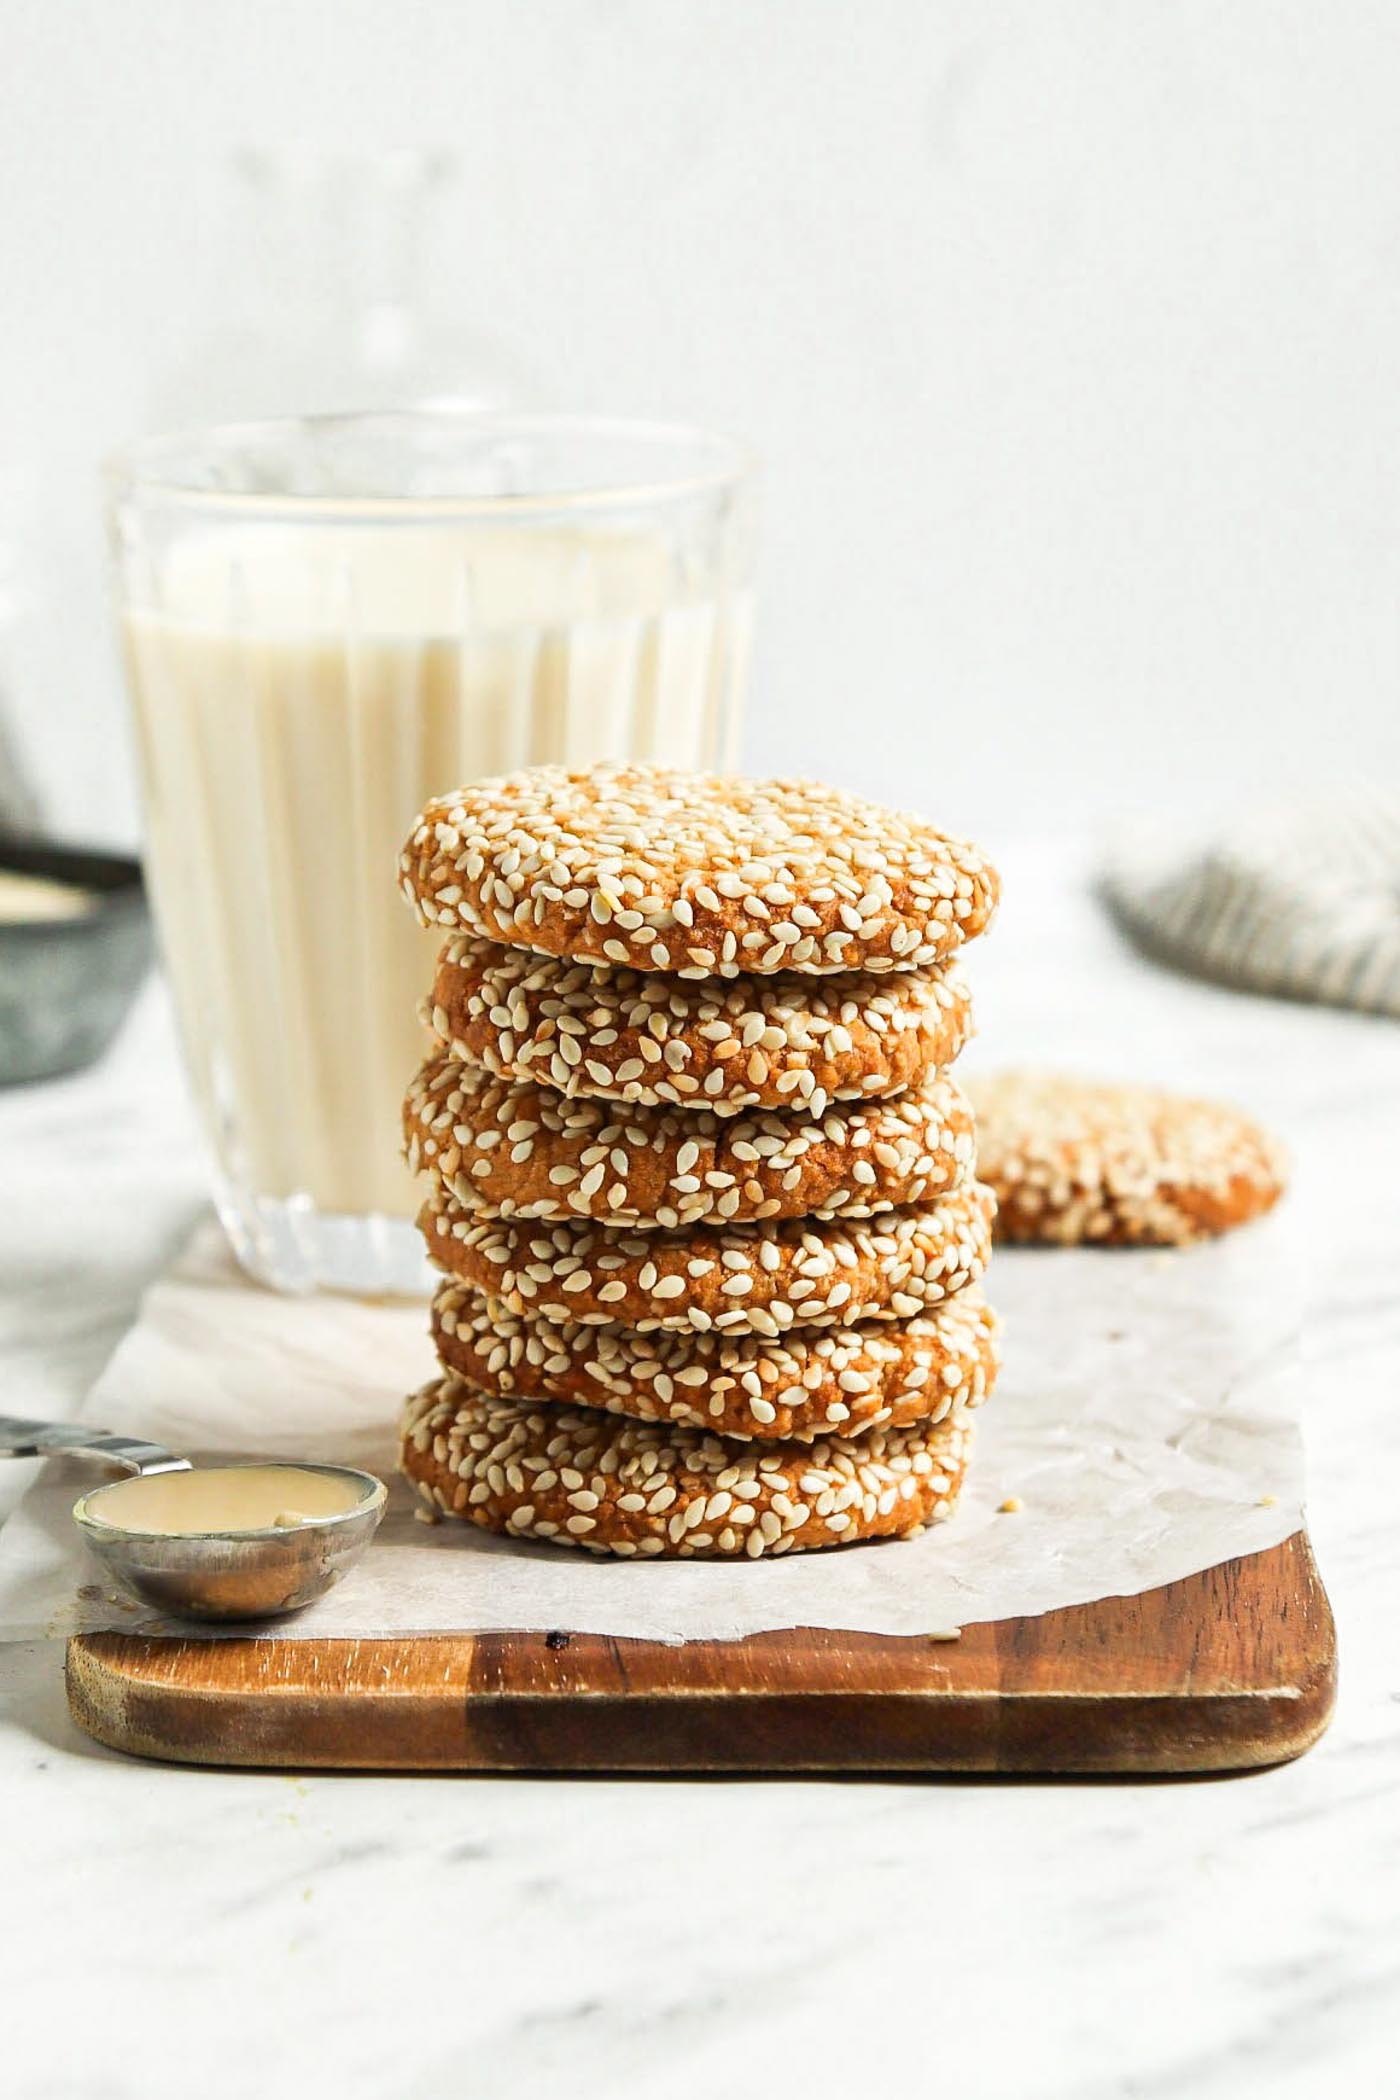 Stack of 5 sesame seed-coated cookies on a cutting board with a glass of milk behind them.